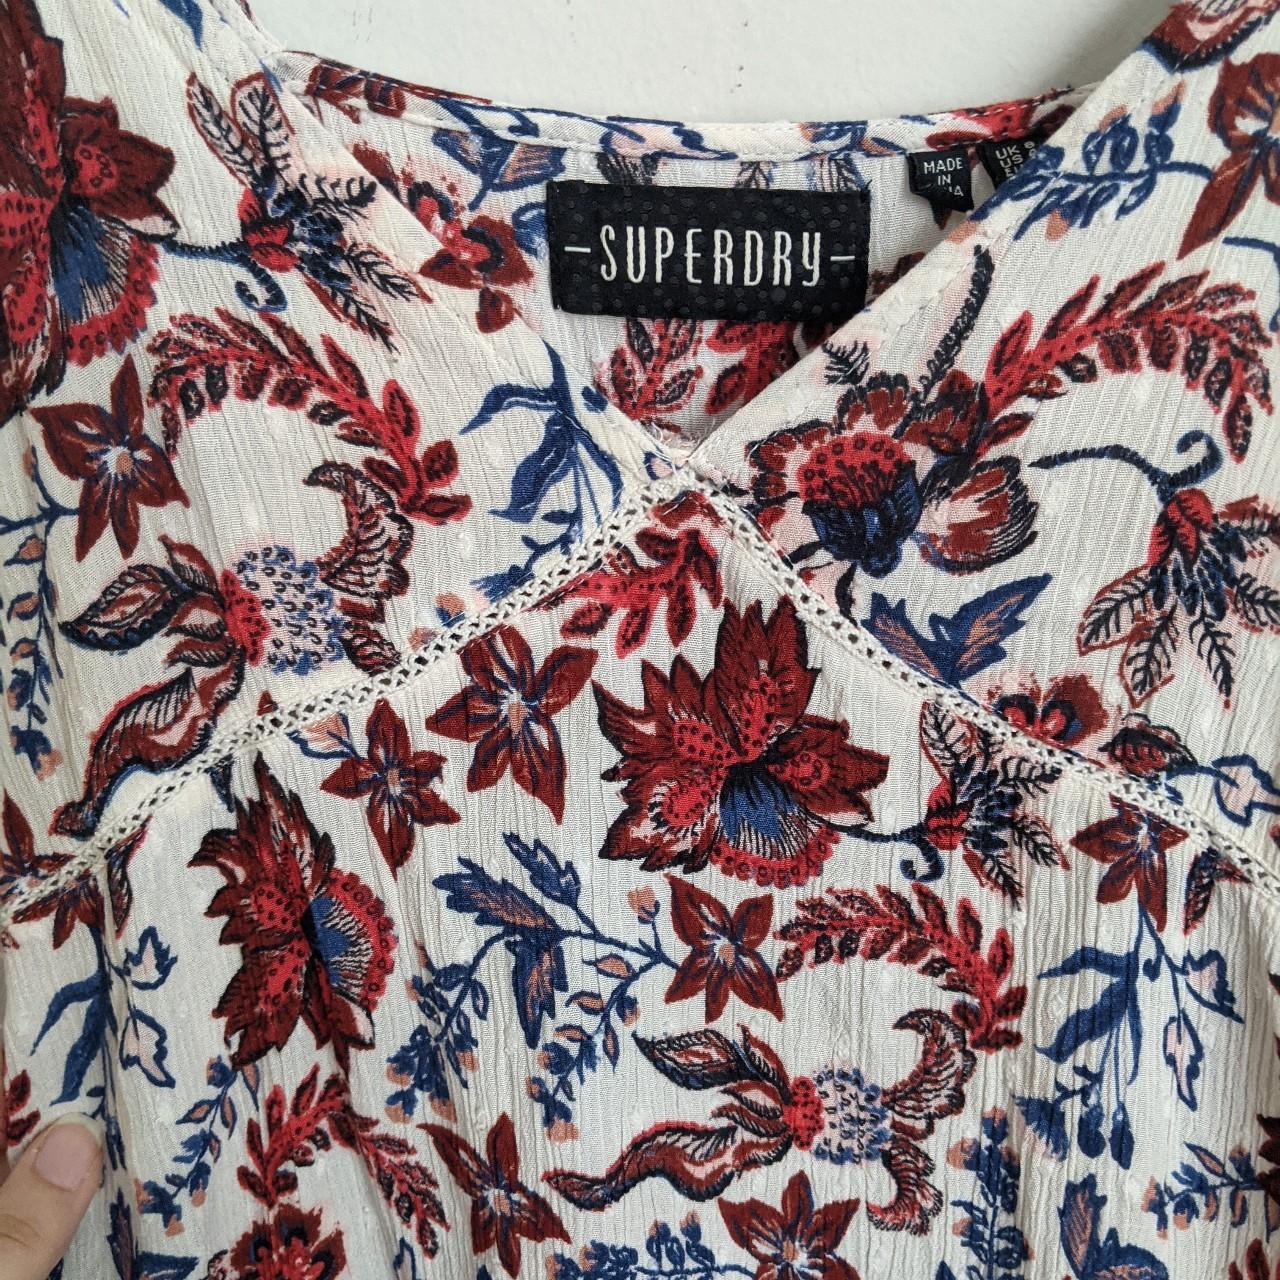 Product Image 3 - Superdry Floral Cami Top

Good used